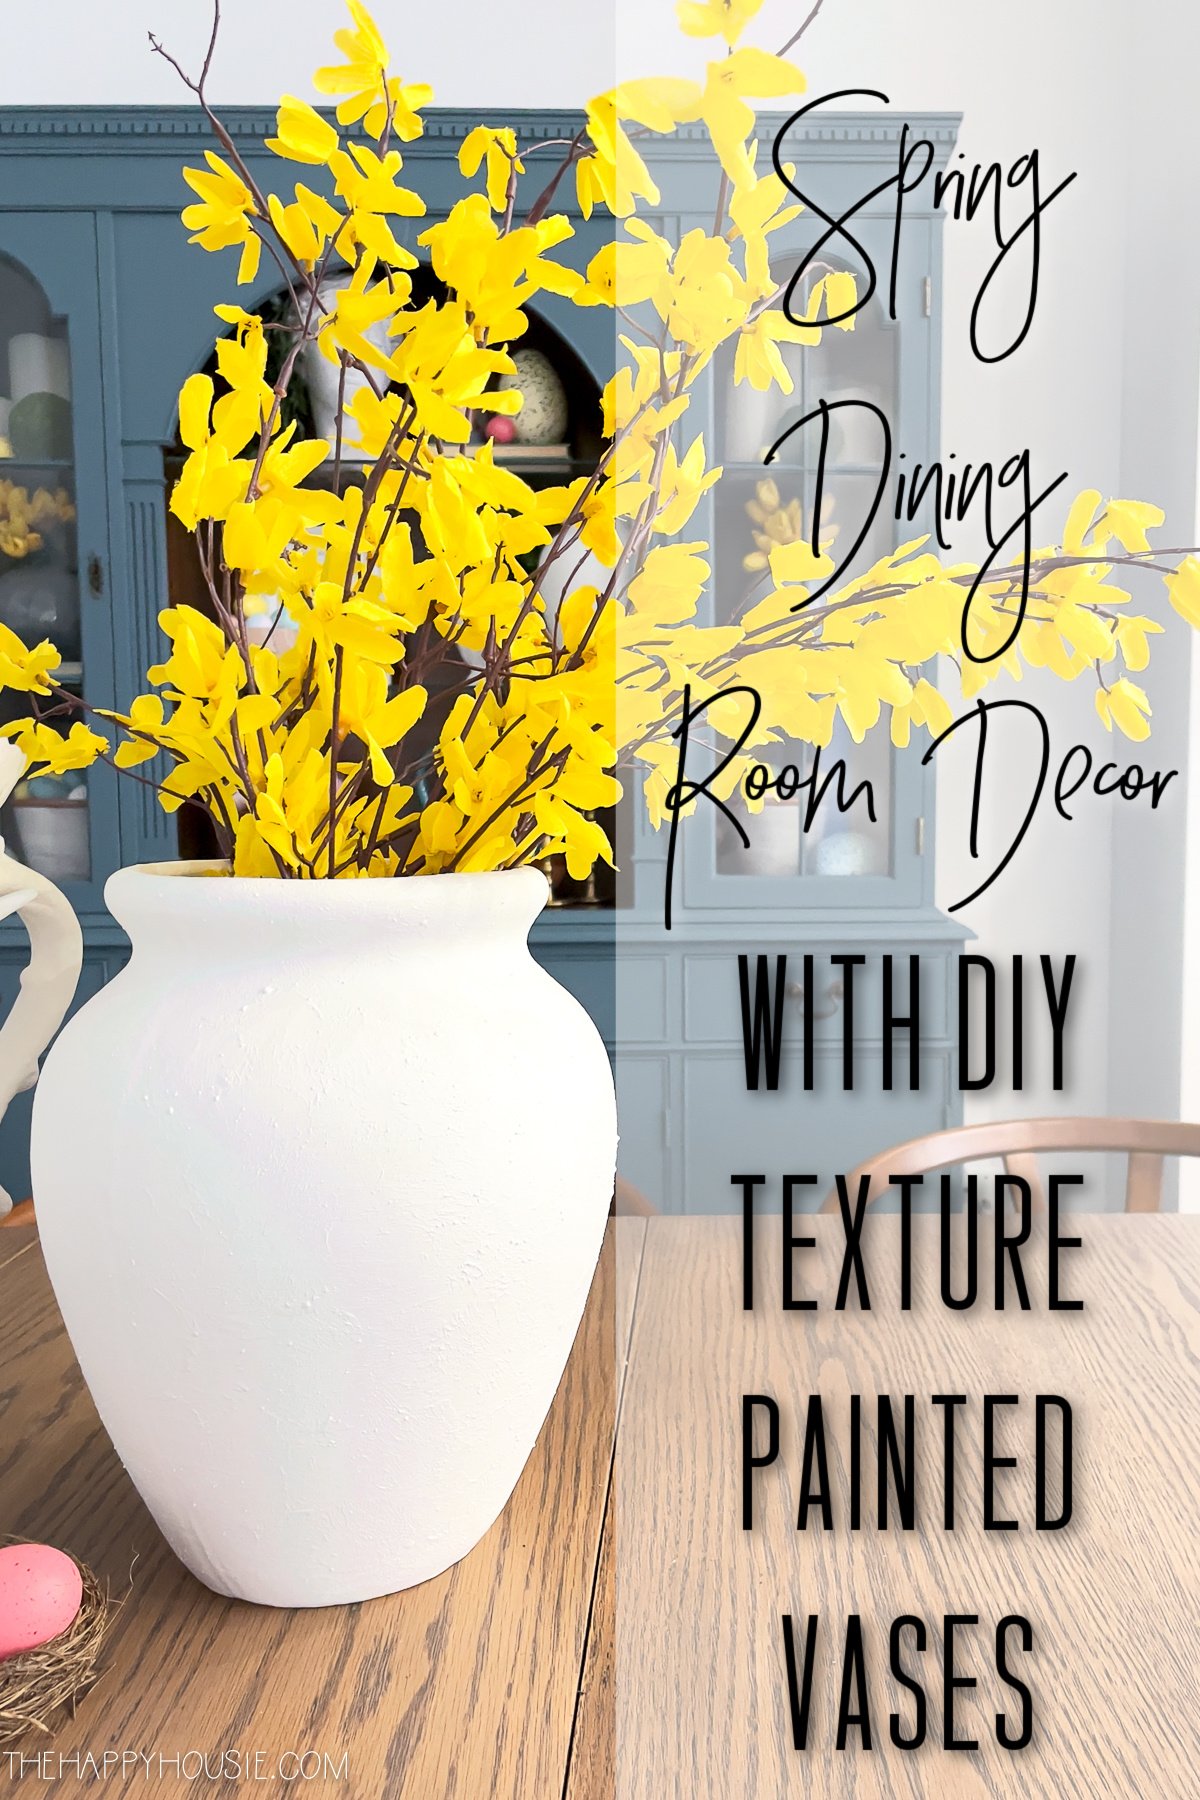 DIY texture painted vase with forsythia blooms